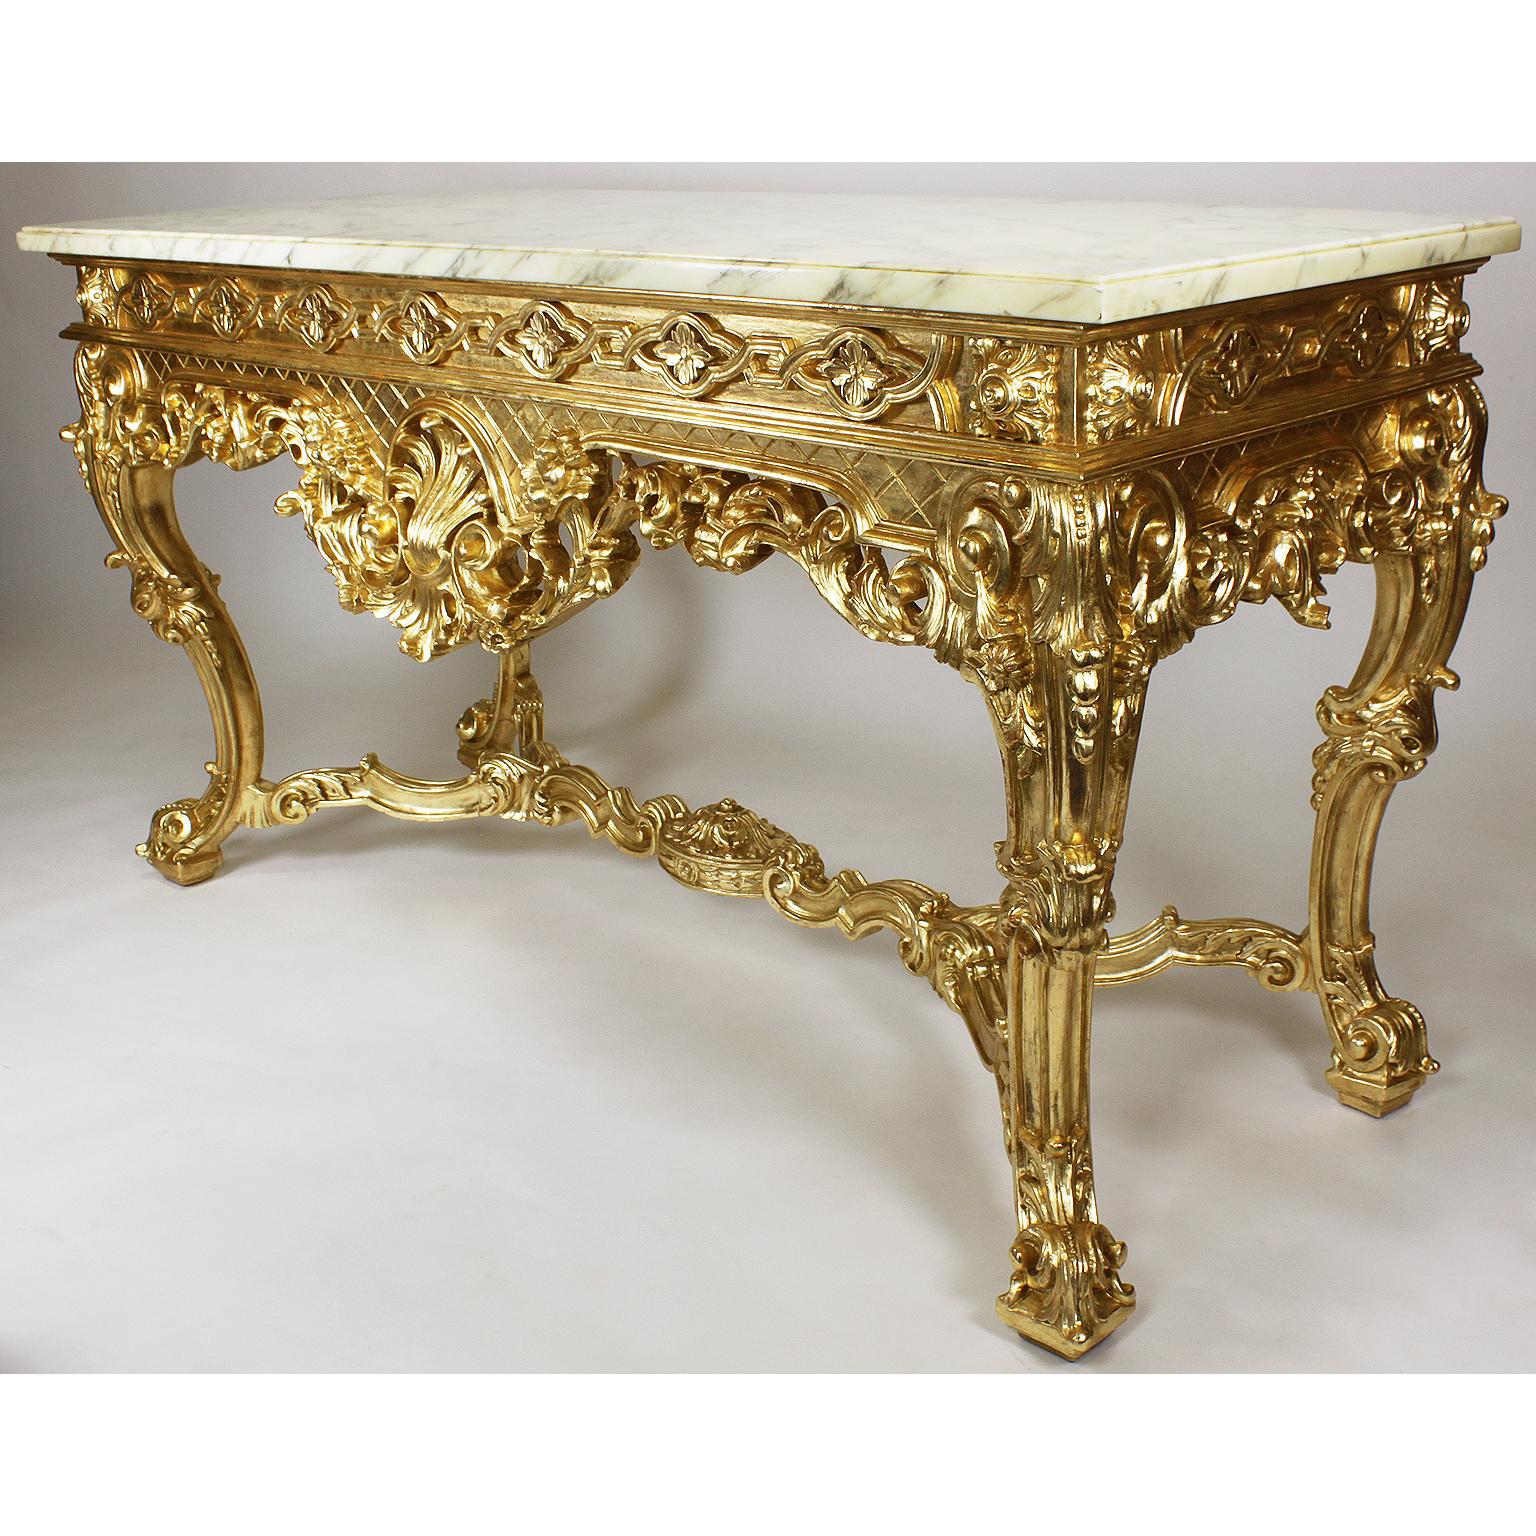 An English George II style giltwood carved console table with marble top. The ornately carved apron with filigree floral, scrolls, acanthus and flowers, centered with shell-shaped leaf flanked by a pair of cornucopias filled with fruits and acorns,